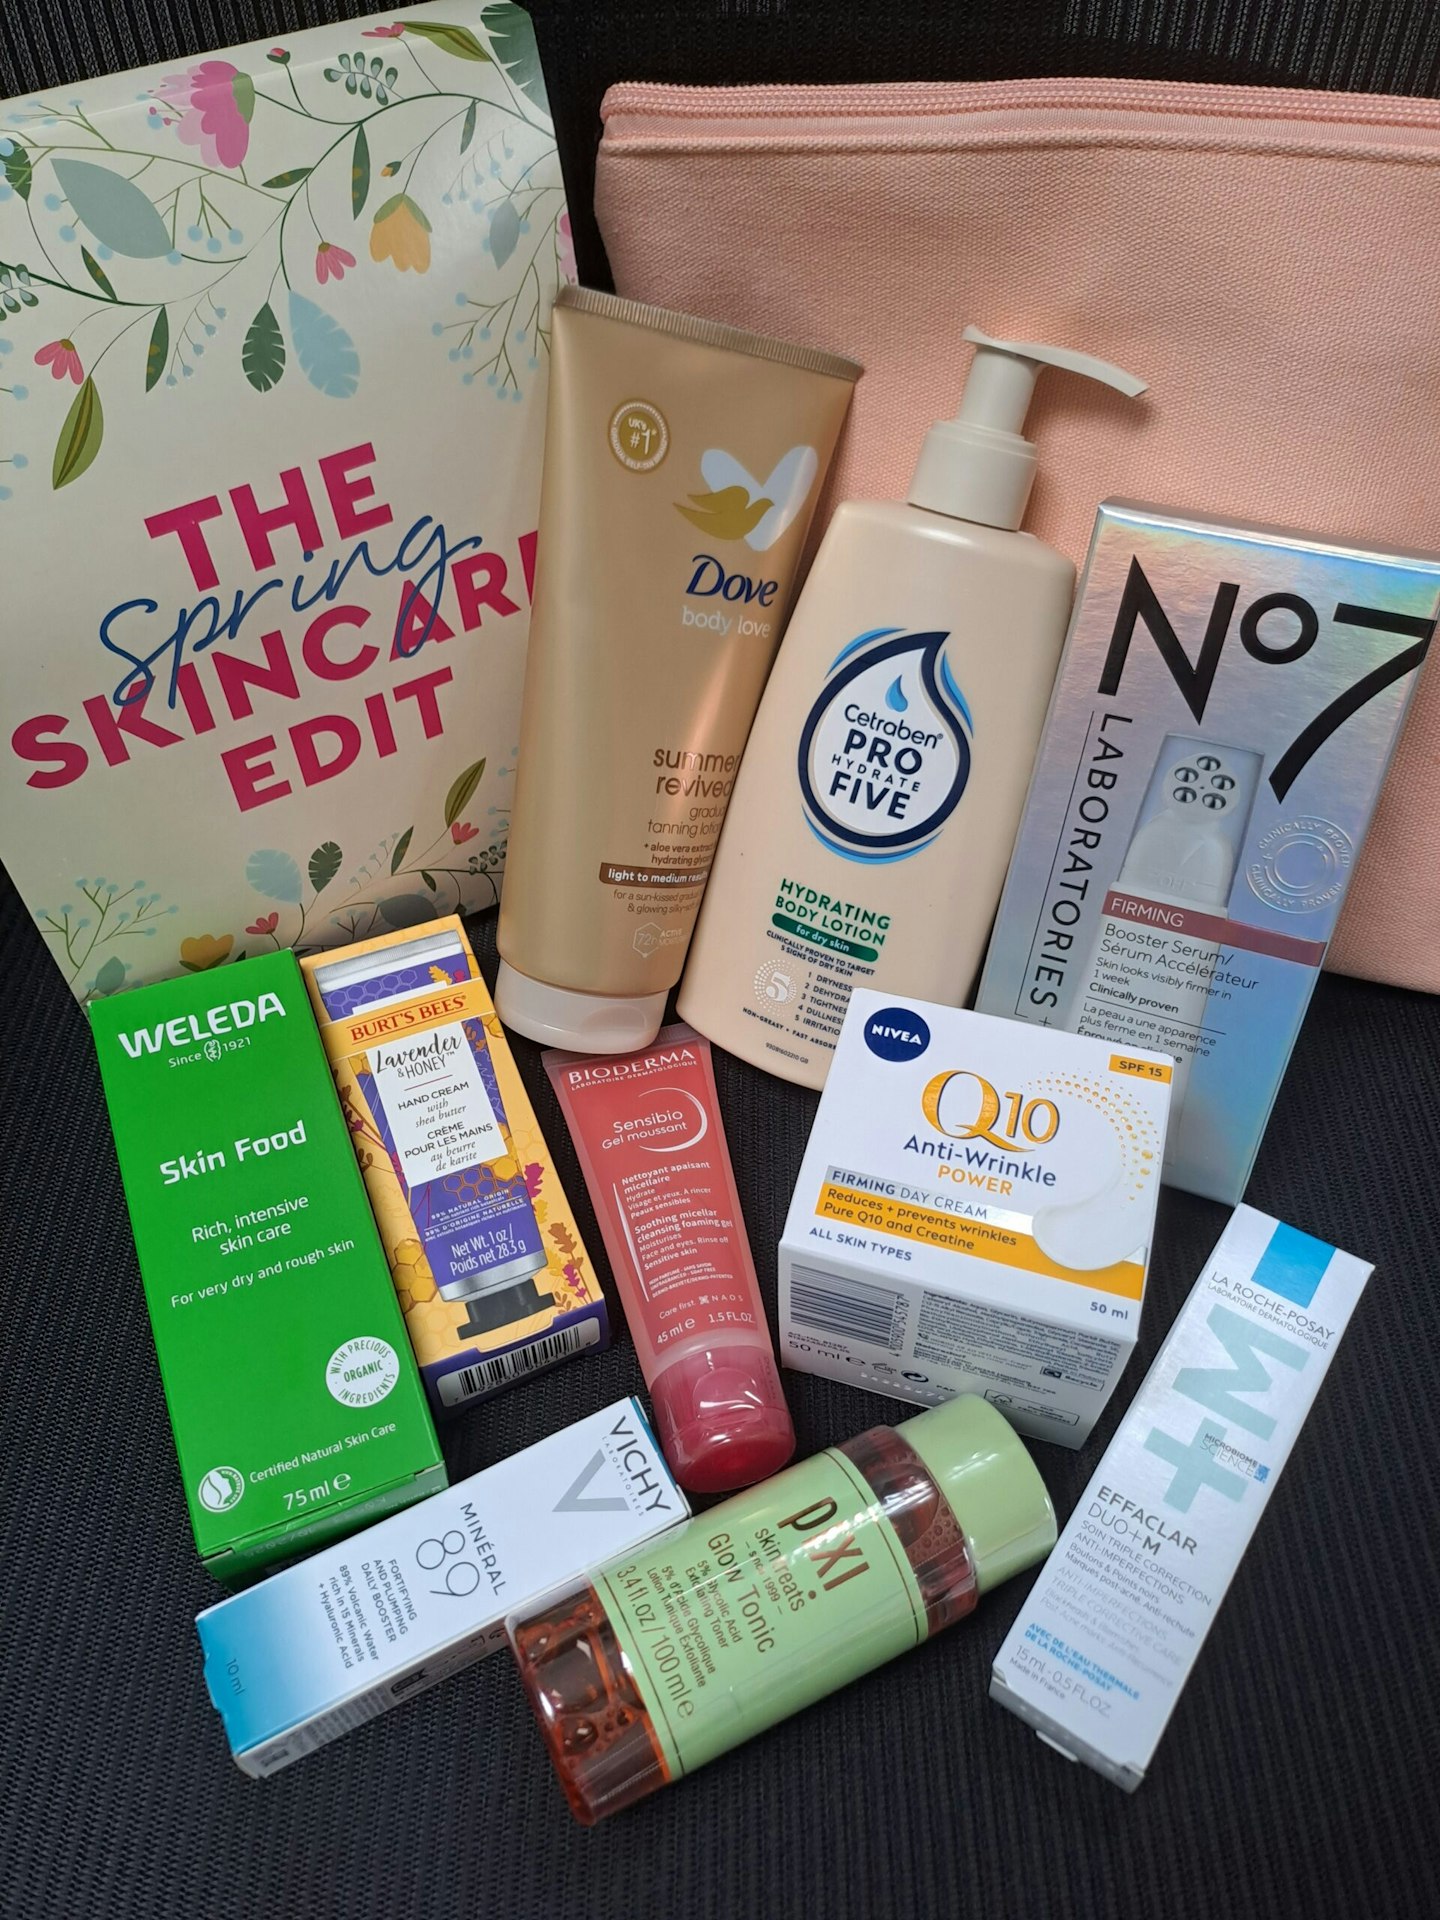 Boots The Spring Skincare Edit beauty box